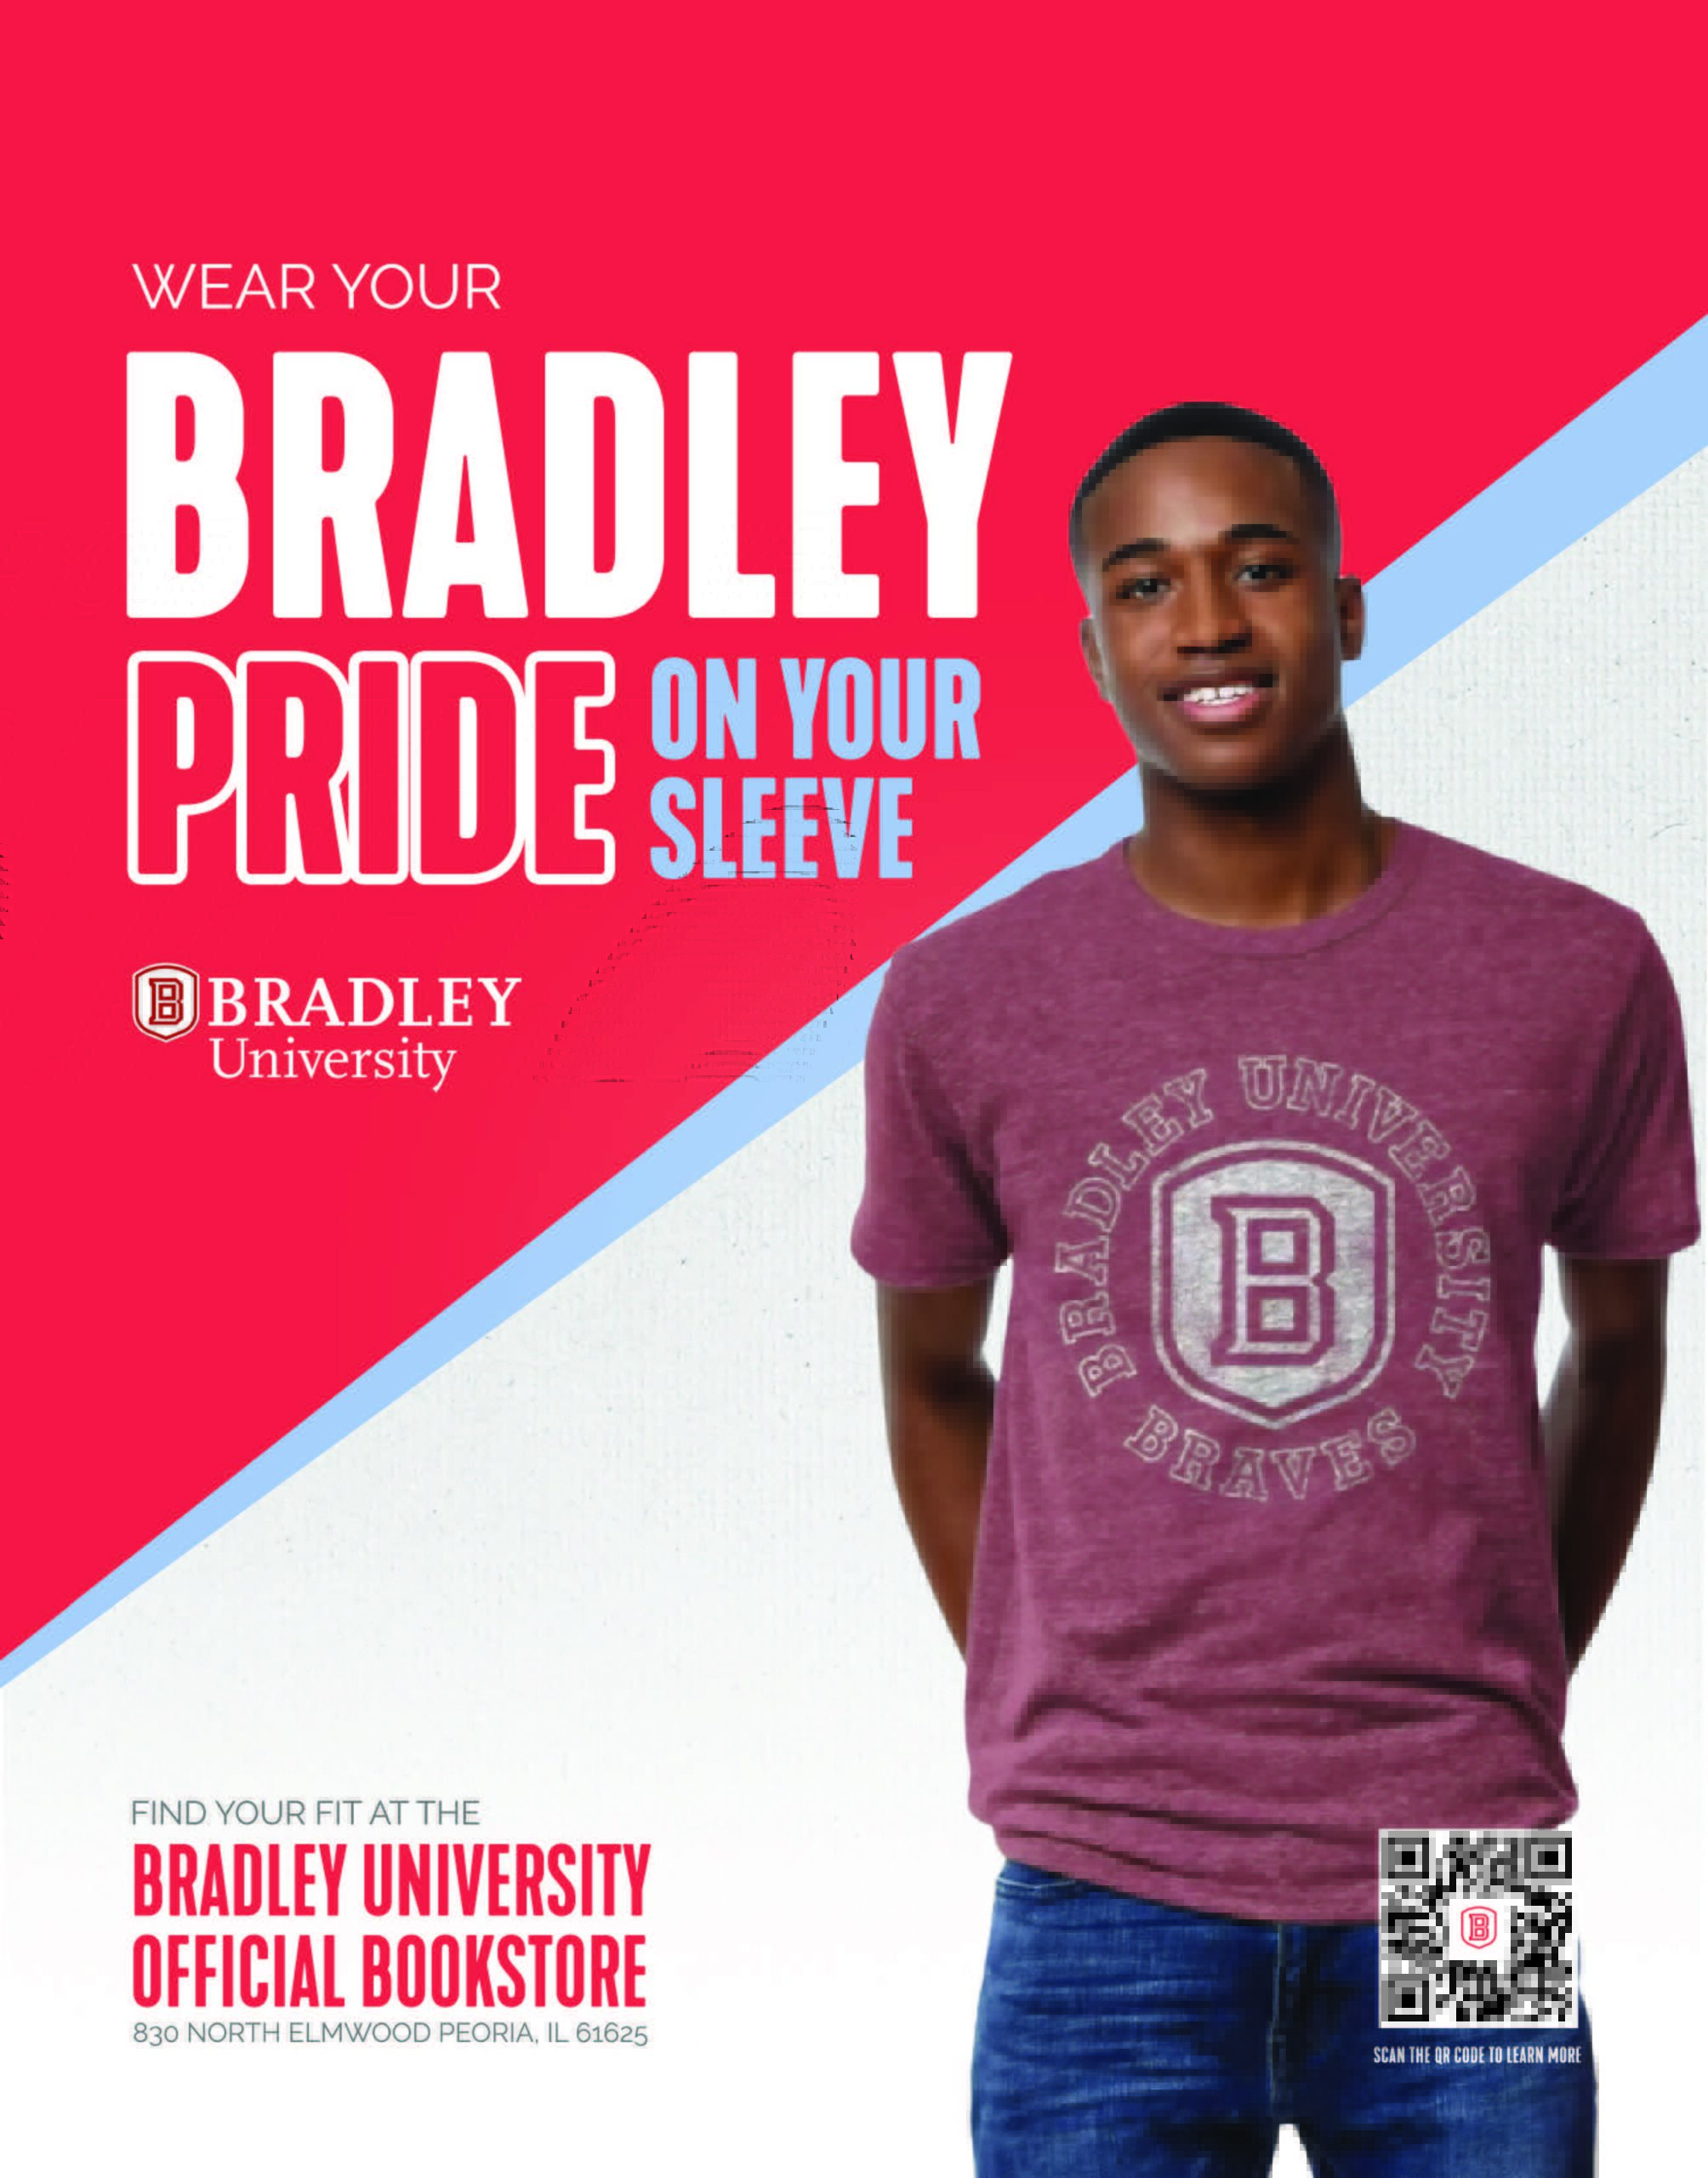 Wear your Bradley pride on your sleeve. Find your fit at the Bradley University bookstore 830 north elmwood Peoria, IL 61625